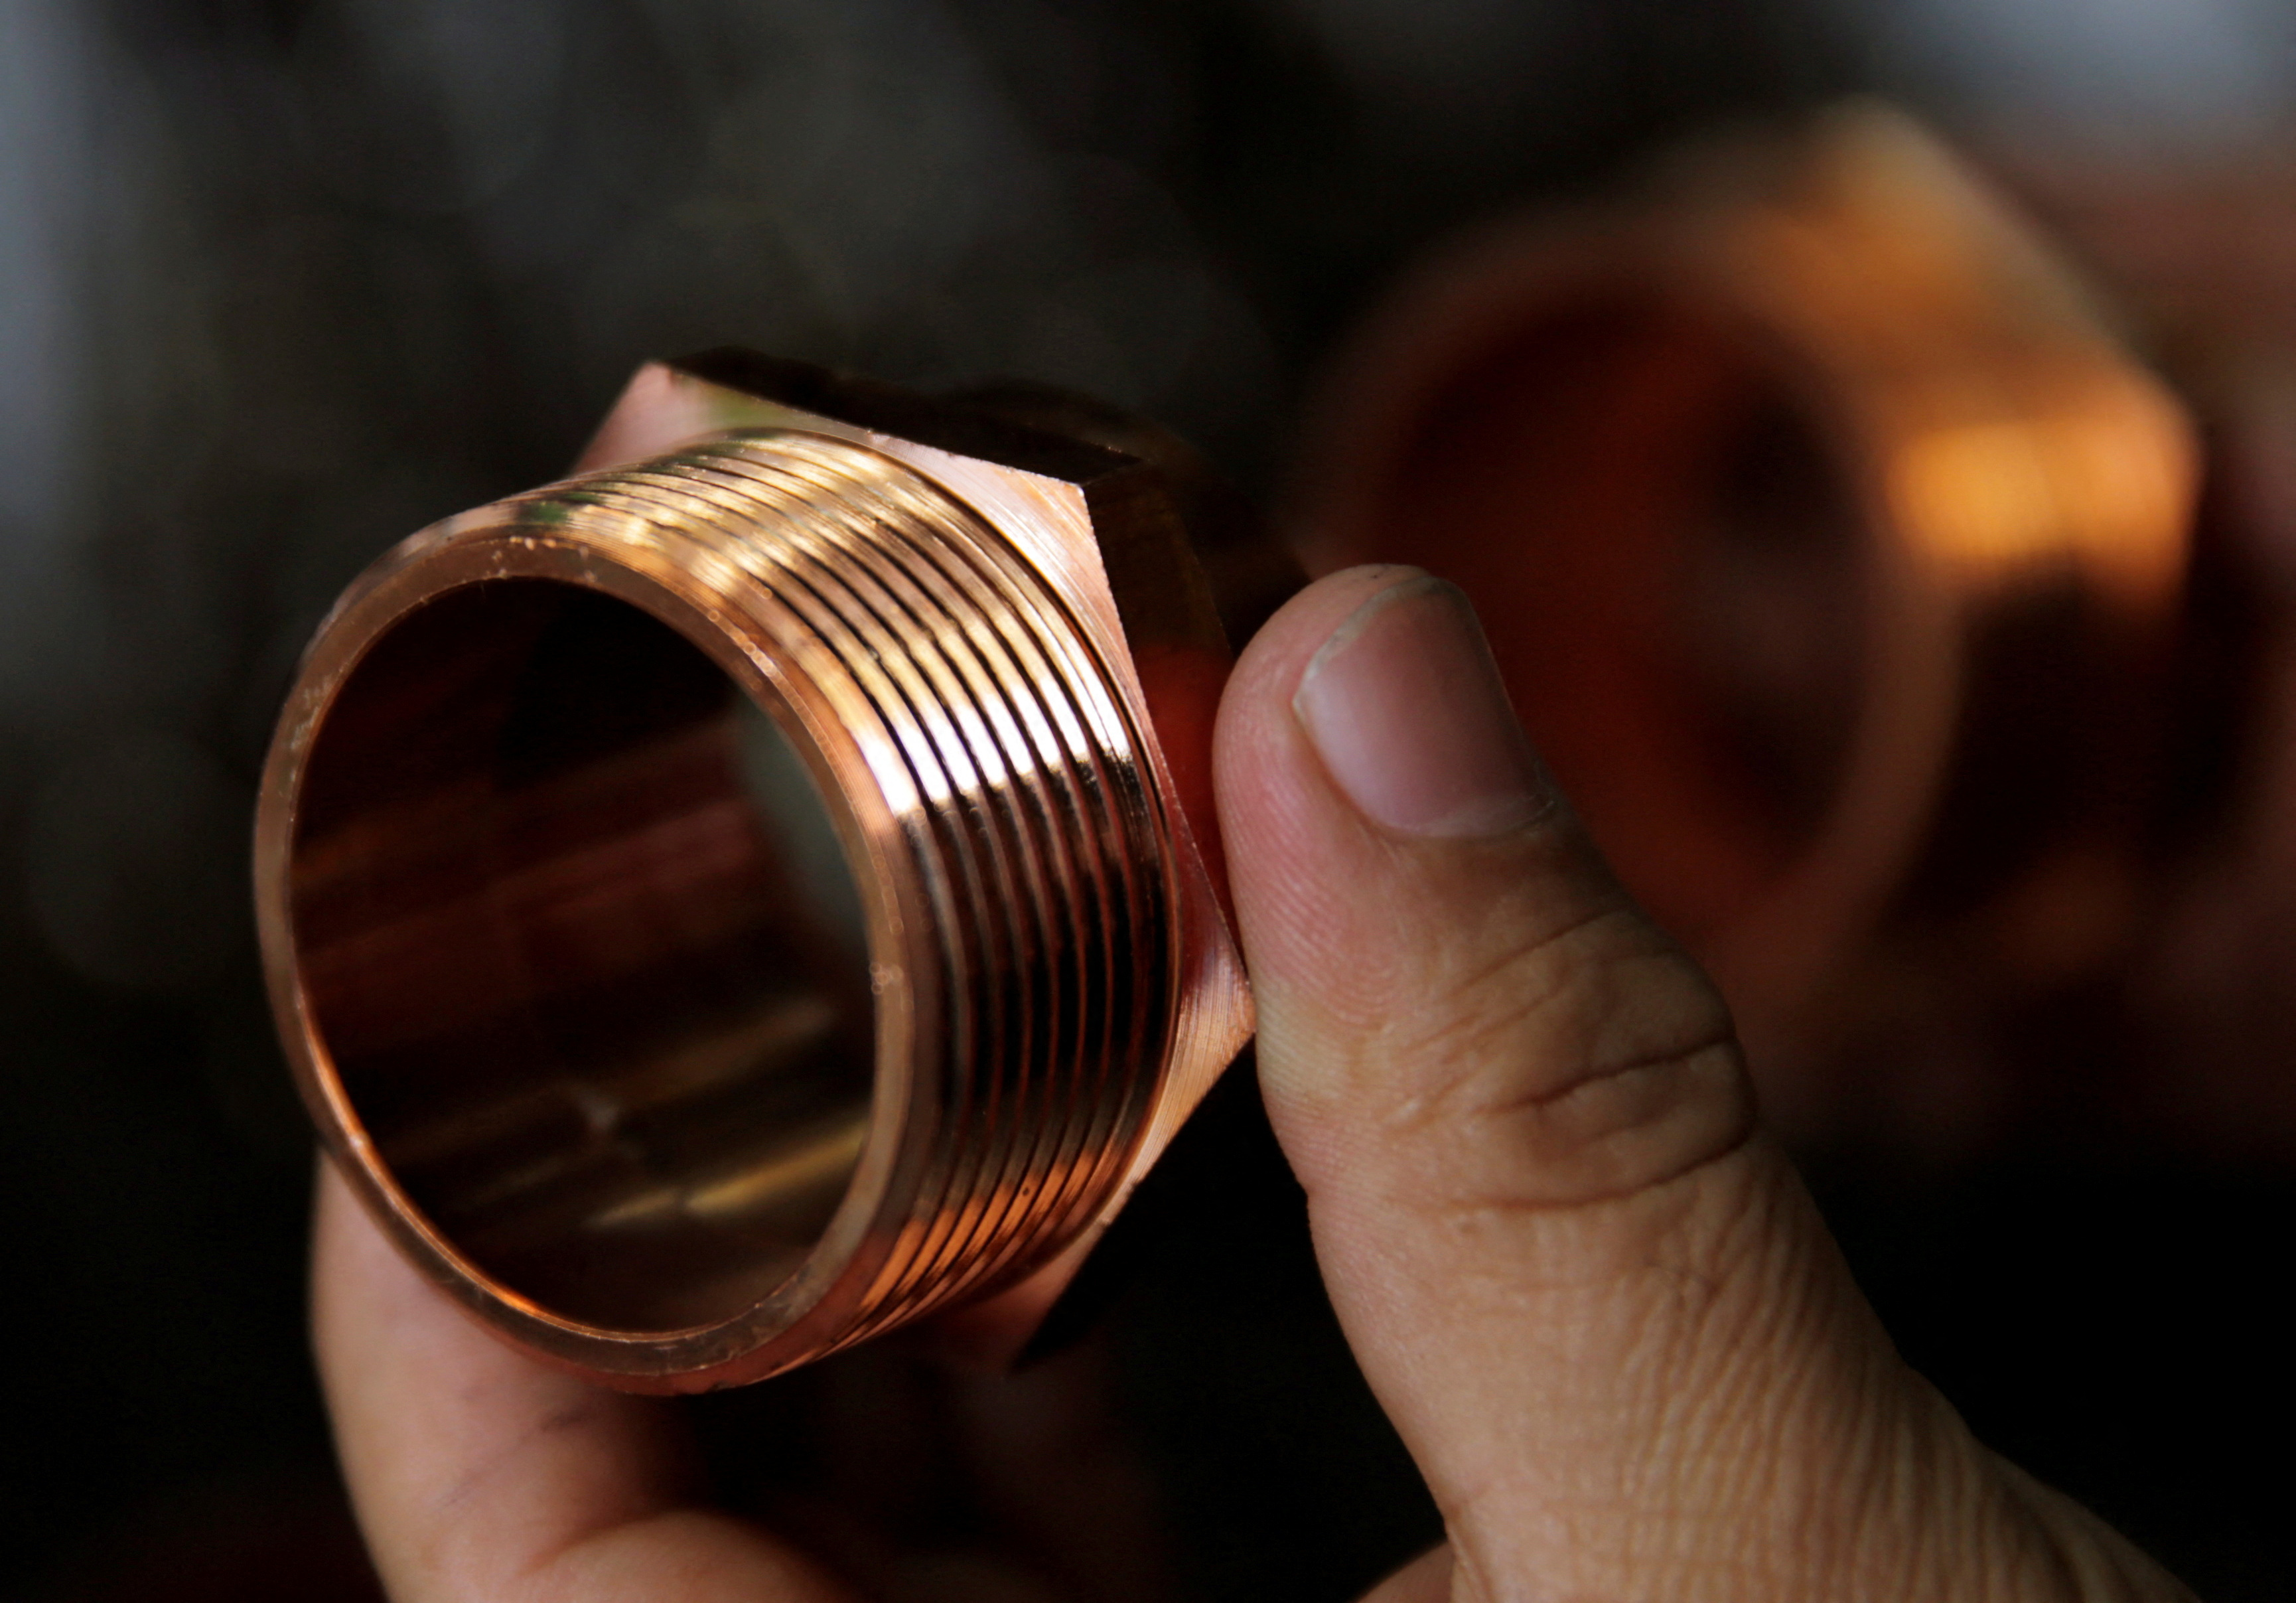 A vendor shows copper components used for plumbing seen on sale at the Surtidora Ferretera River Store in Mexico City